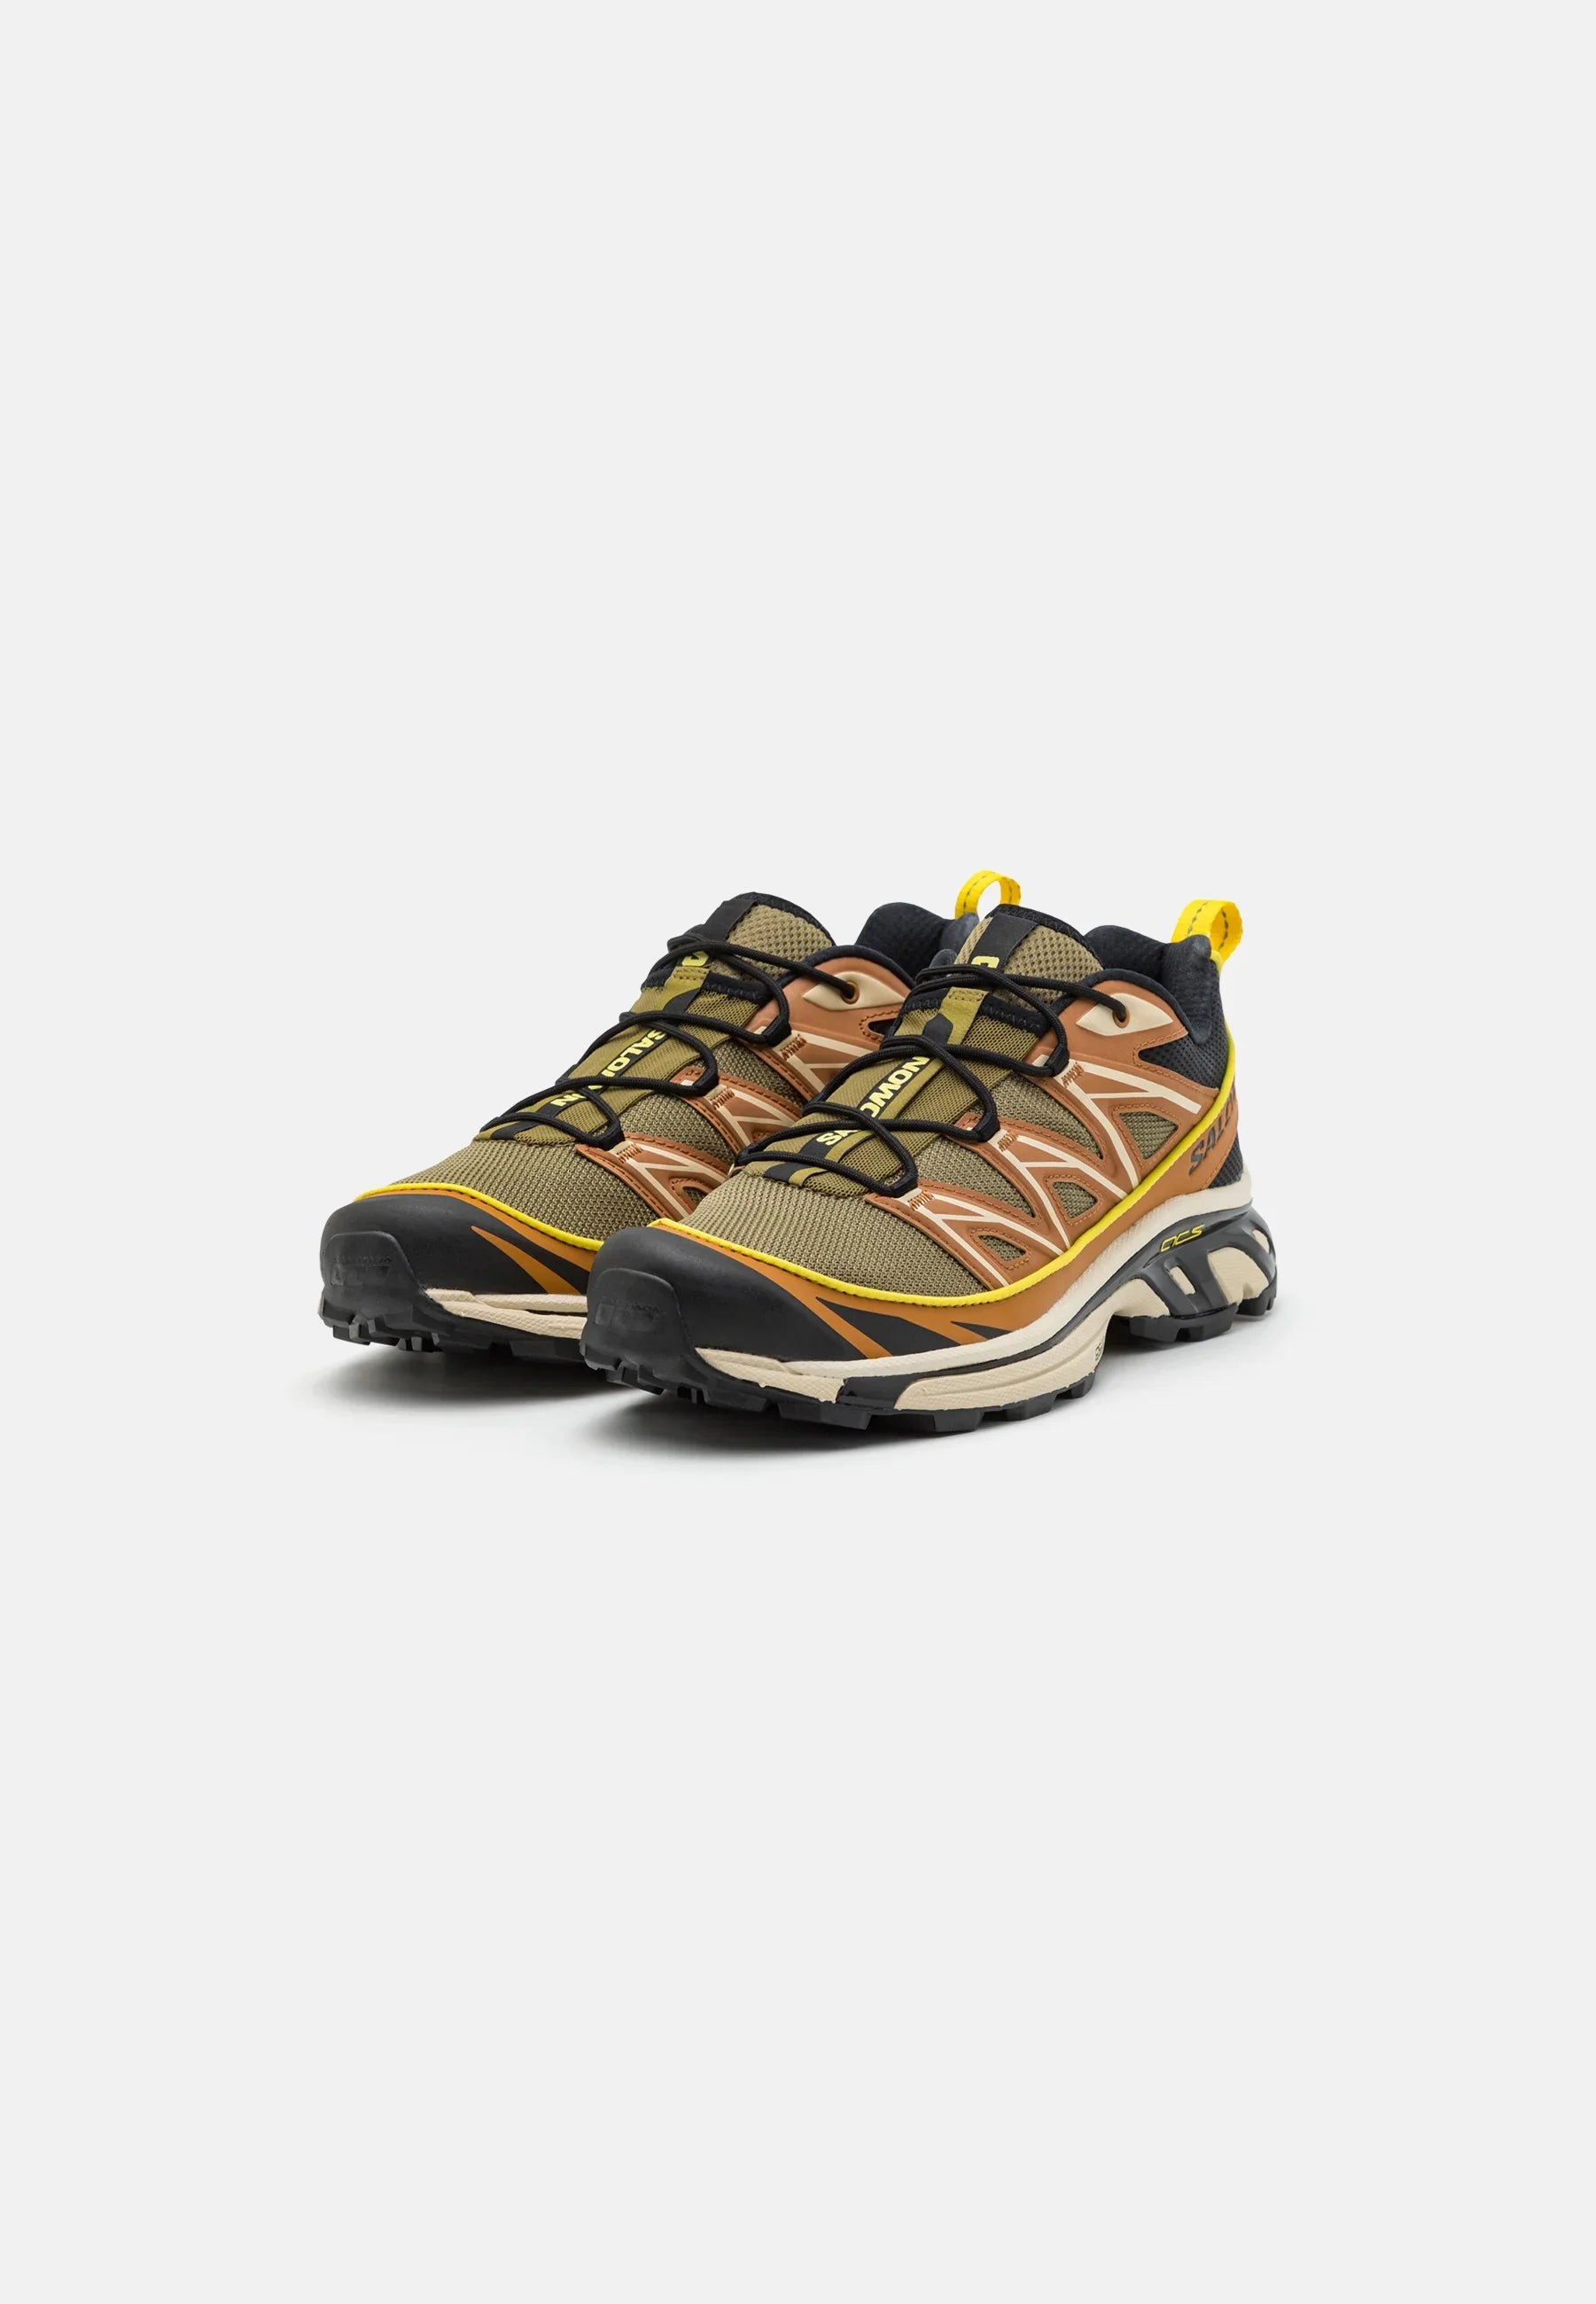 XT-6 EXPANSE SNEAKER - CATHAY SPICE/LIZARD/BUTTERCUP